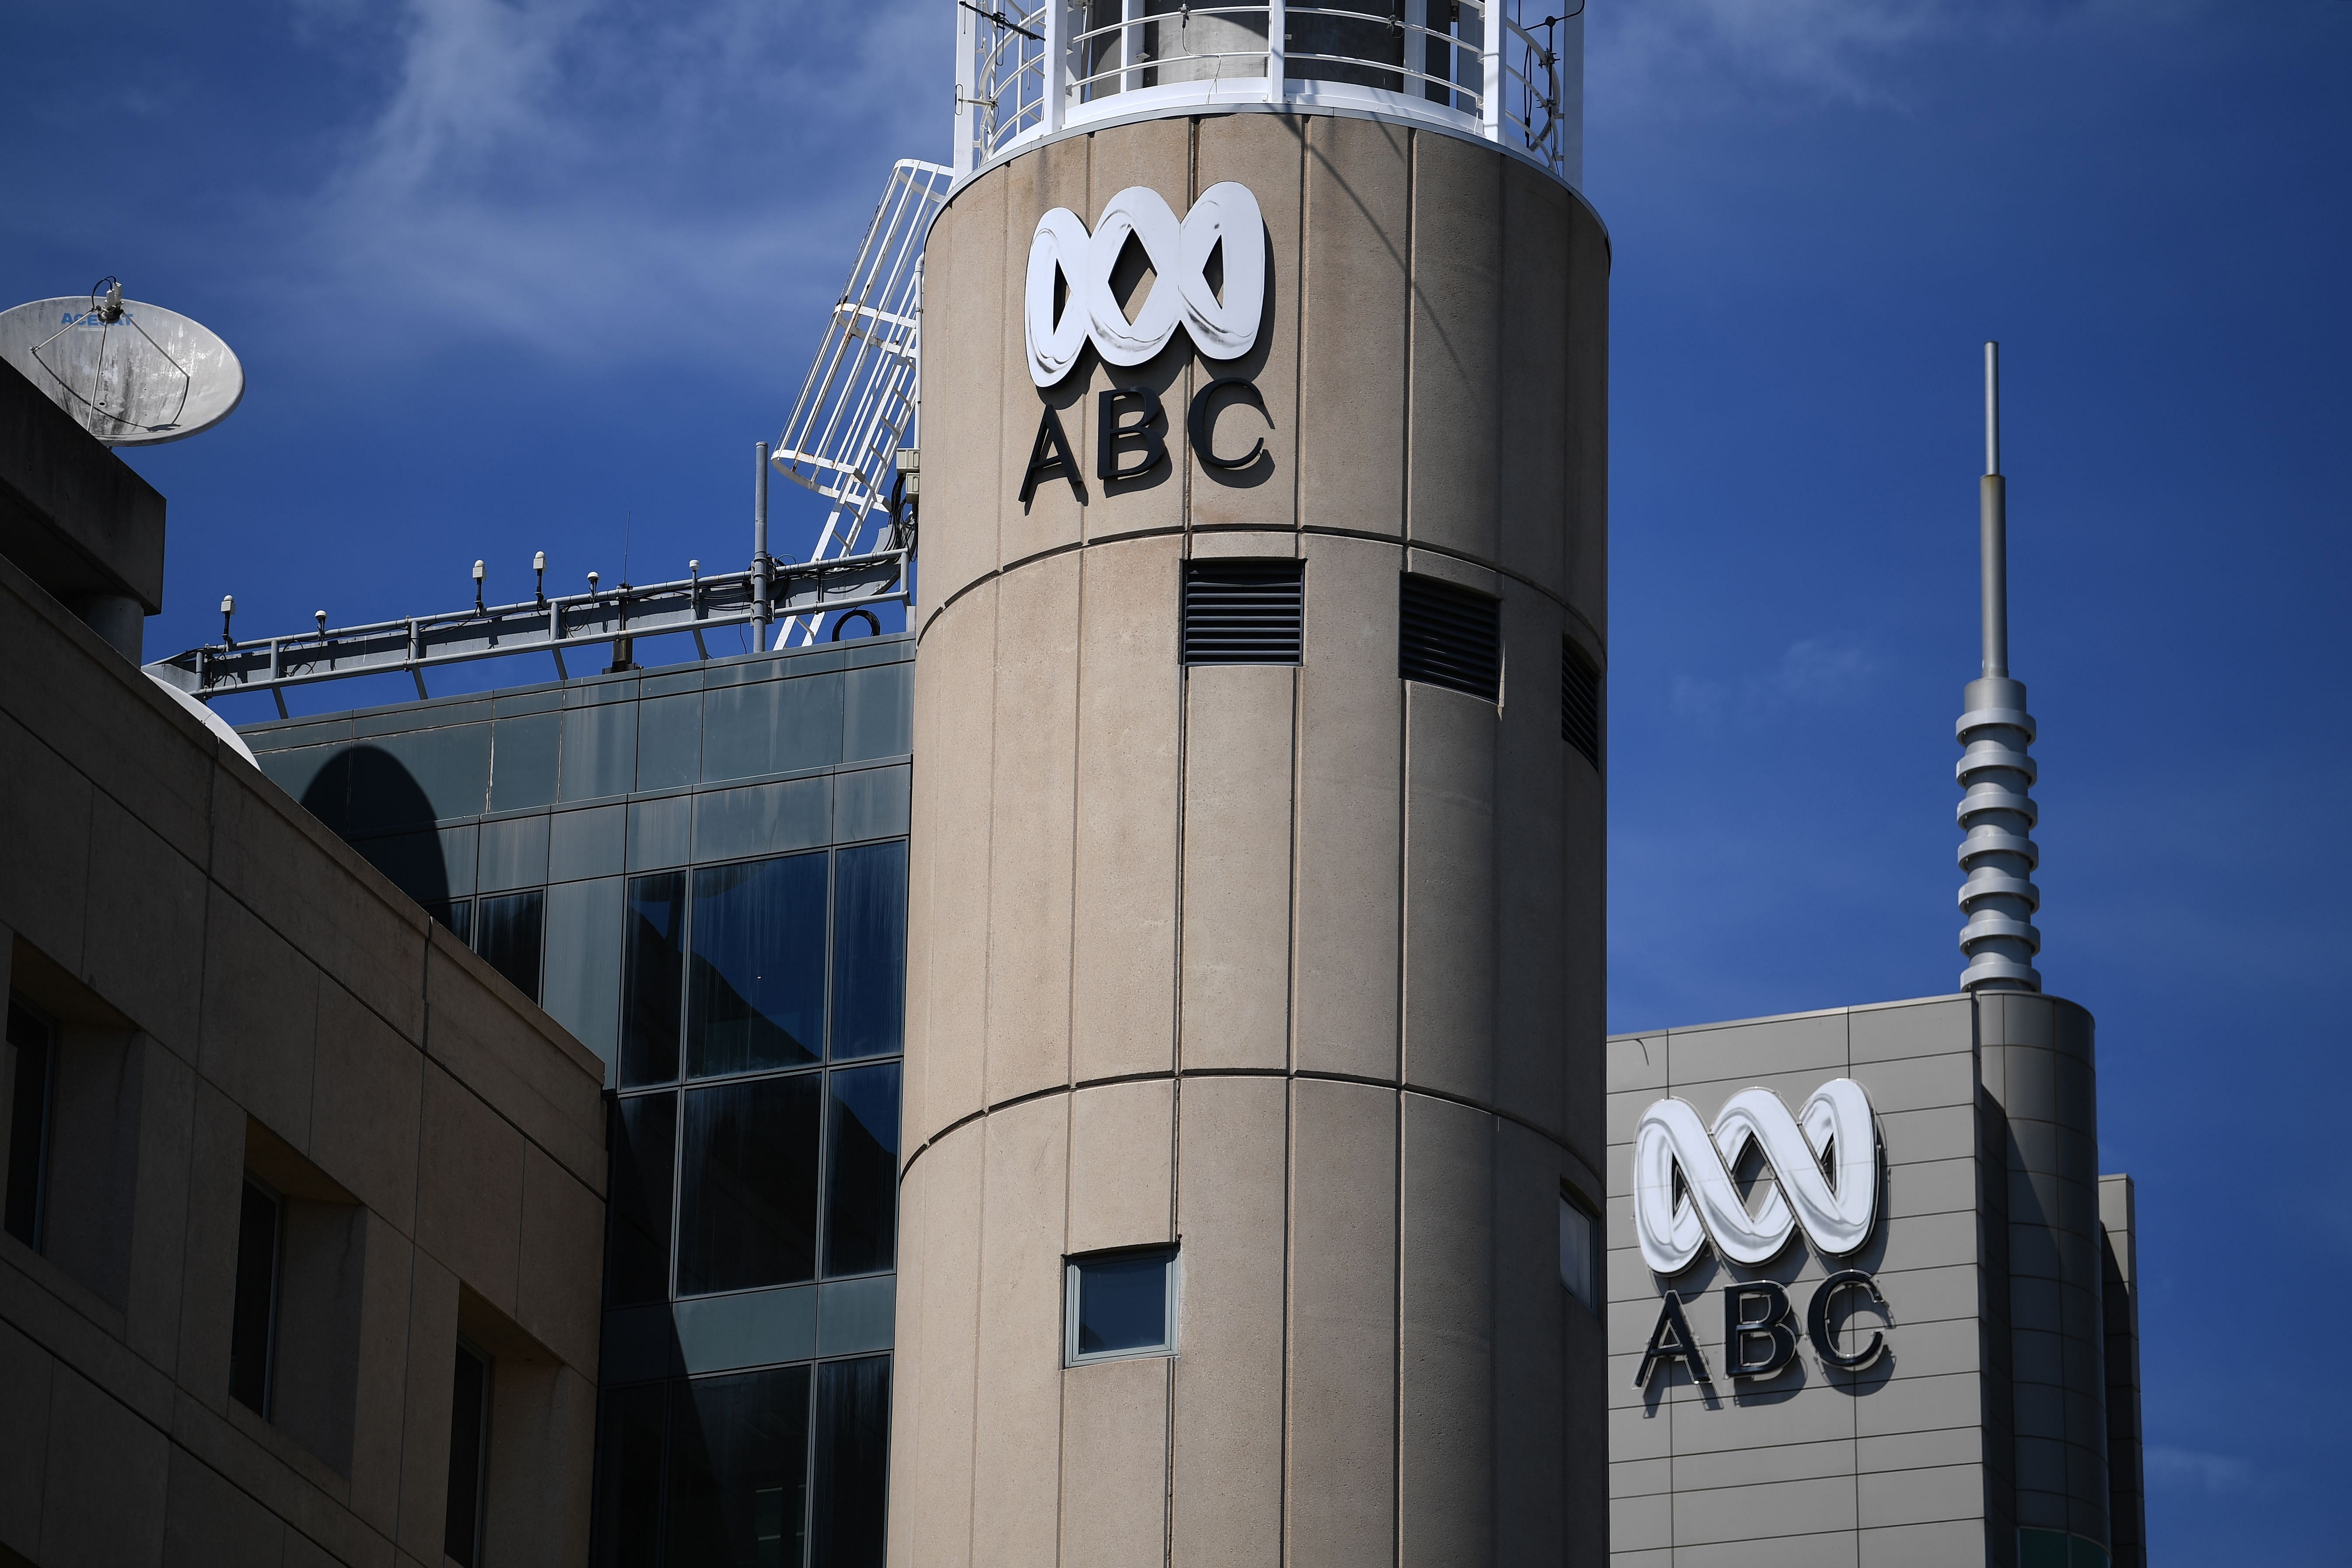 Australia's public broadcaster ABC is seen at its head office building in Sydney. Credits: AFP Photo